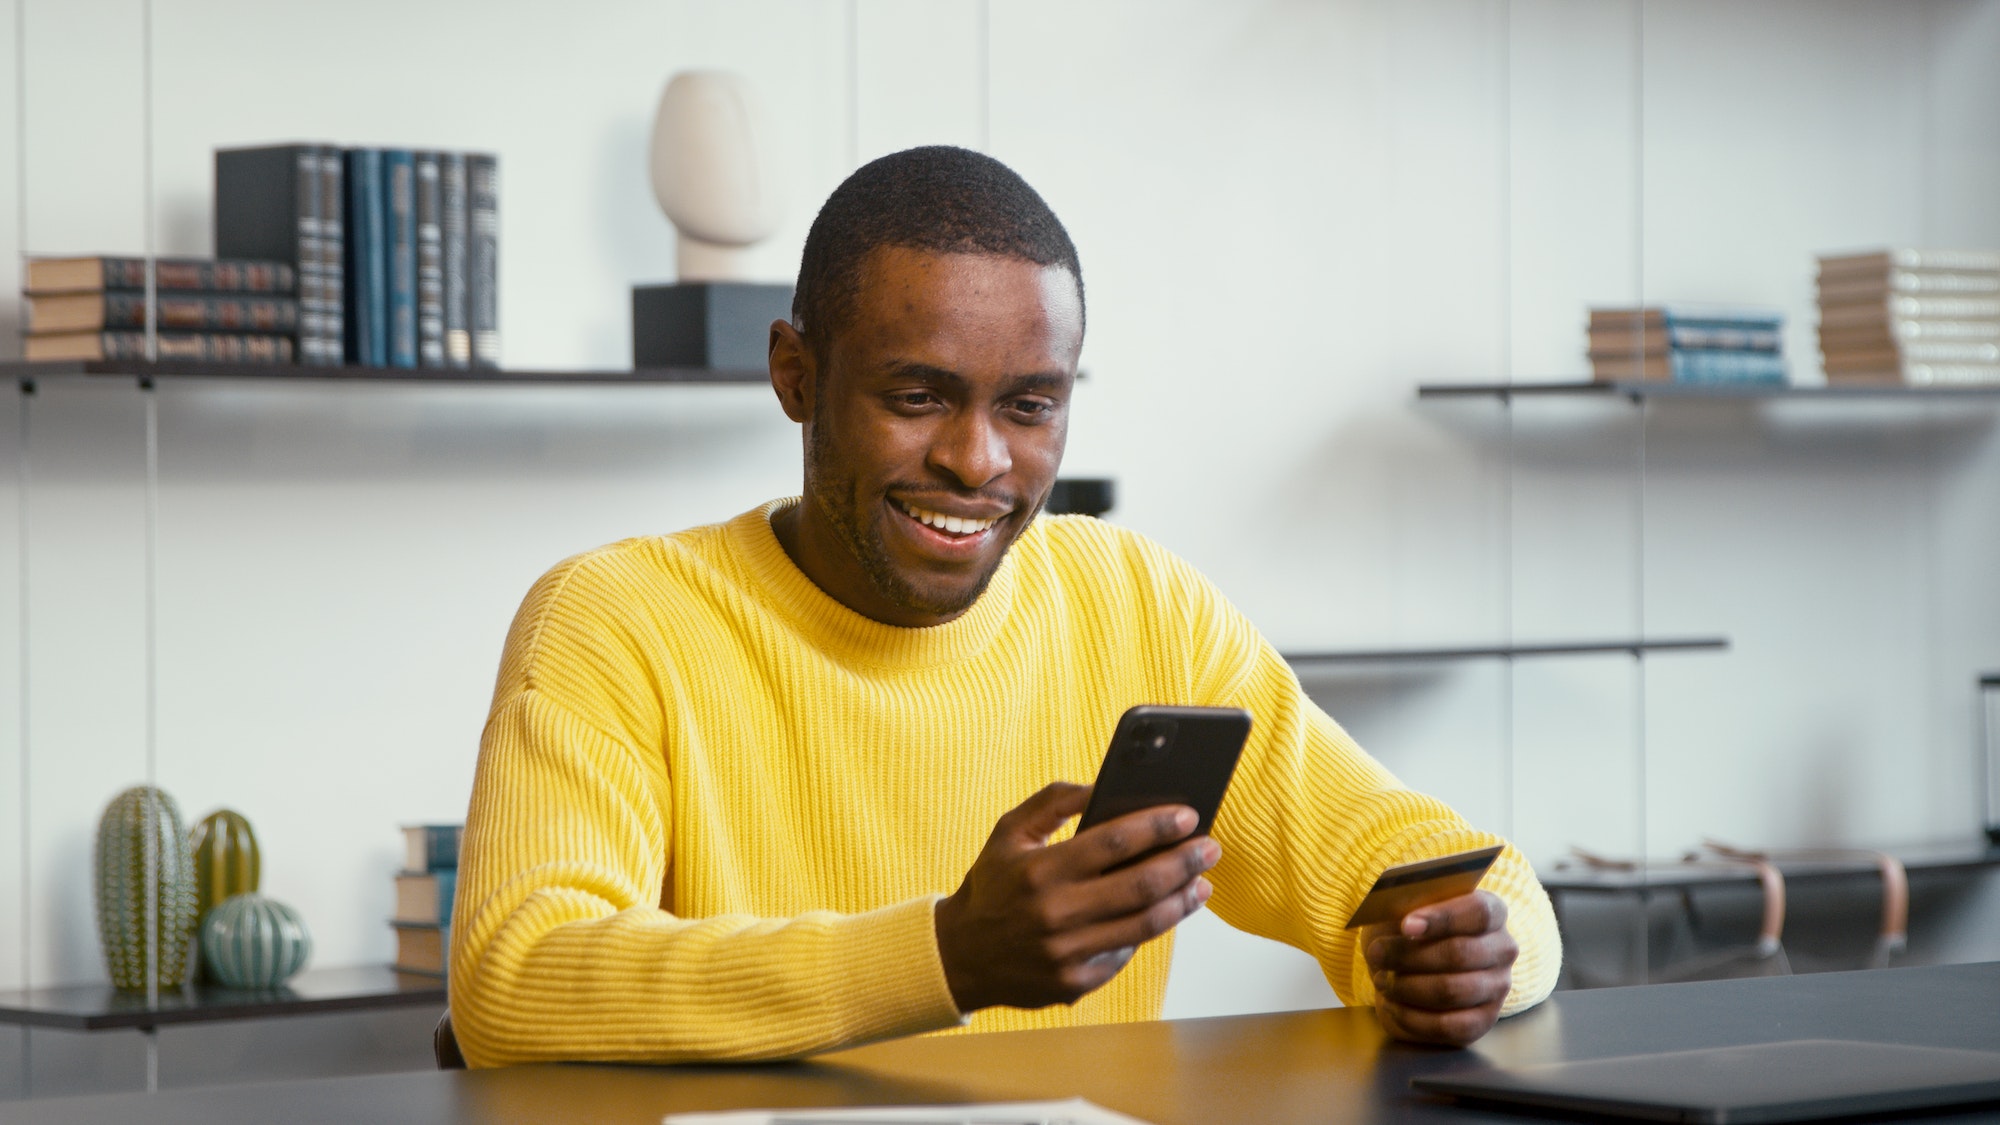 Smiling man in yellow shirt looks at bank card in hand and enters digits to smartphone sitting